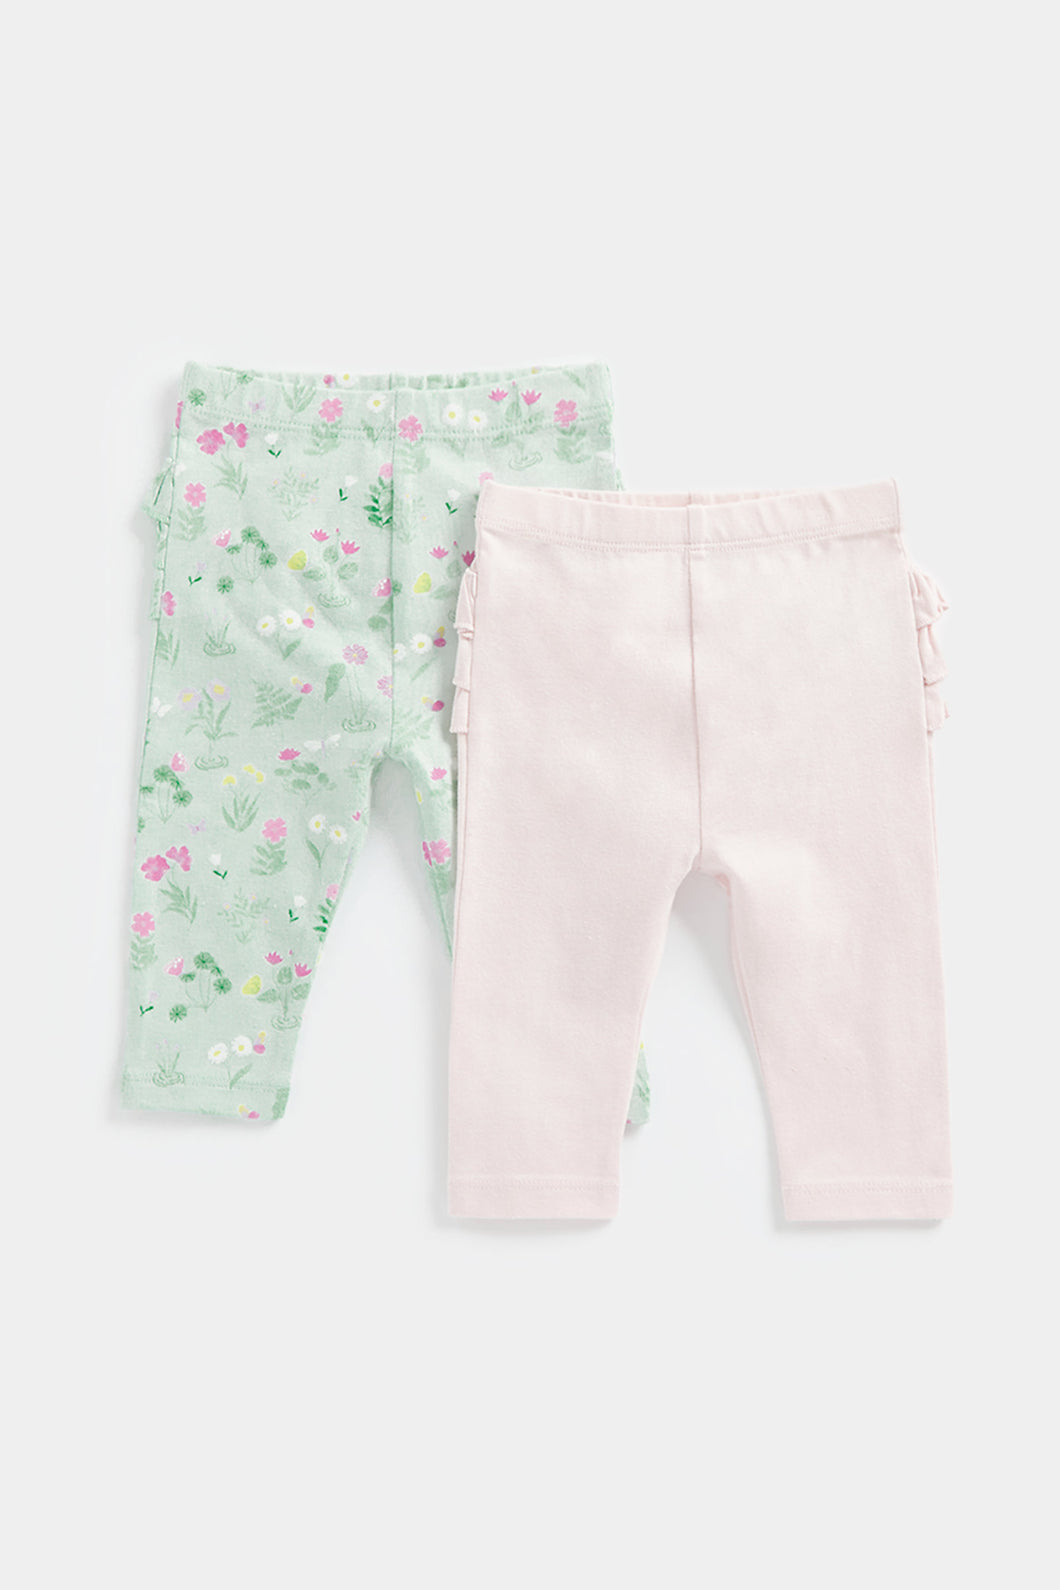 Mothercare Frilly Leggings - 2 Pack